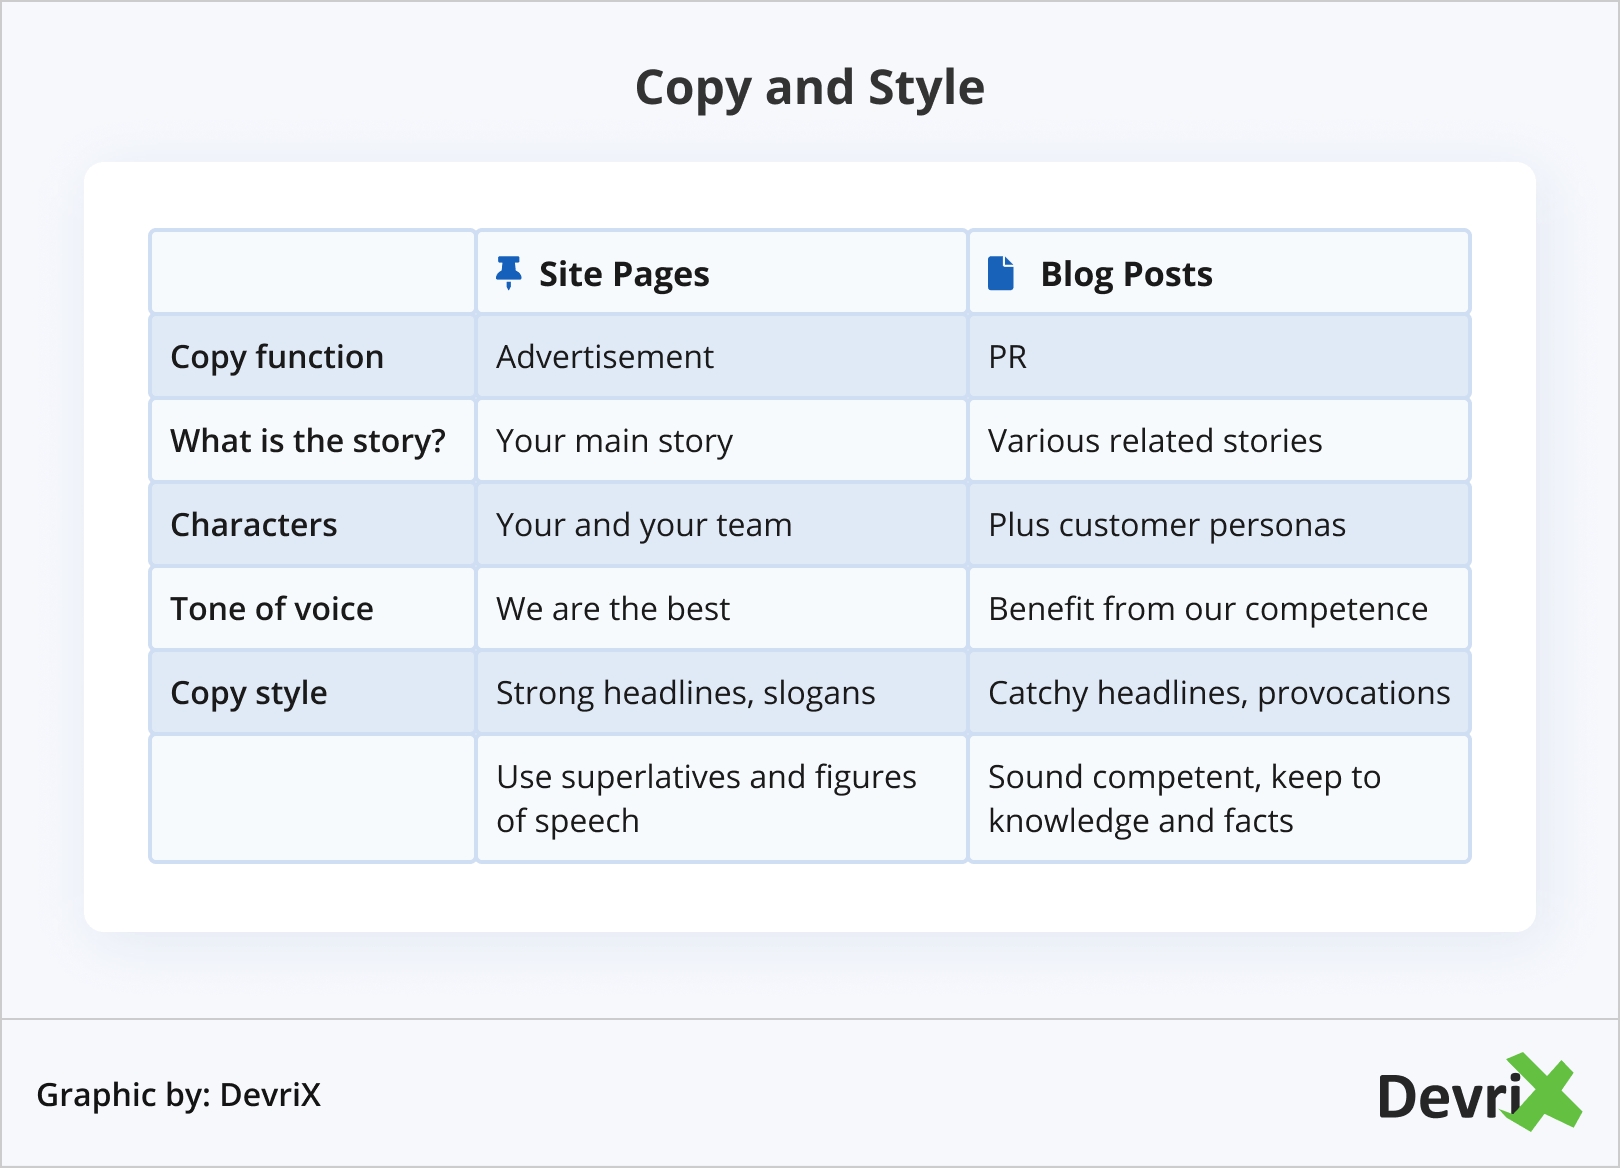 Copy and Style